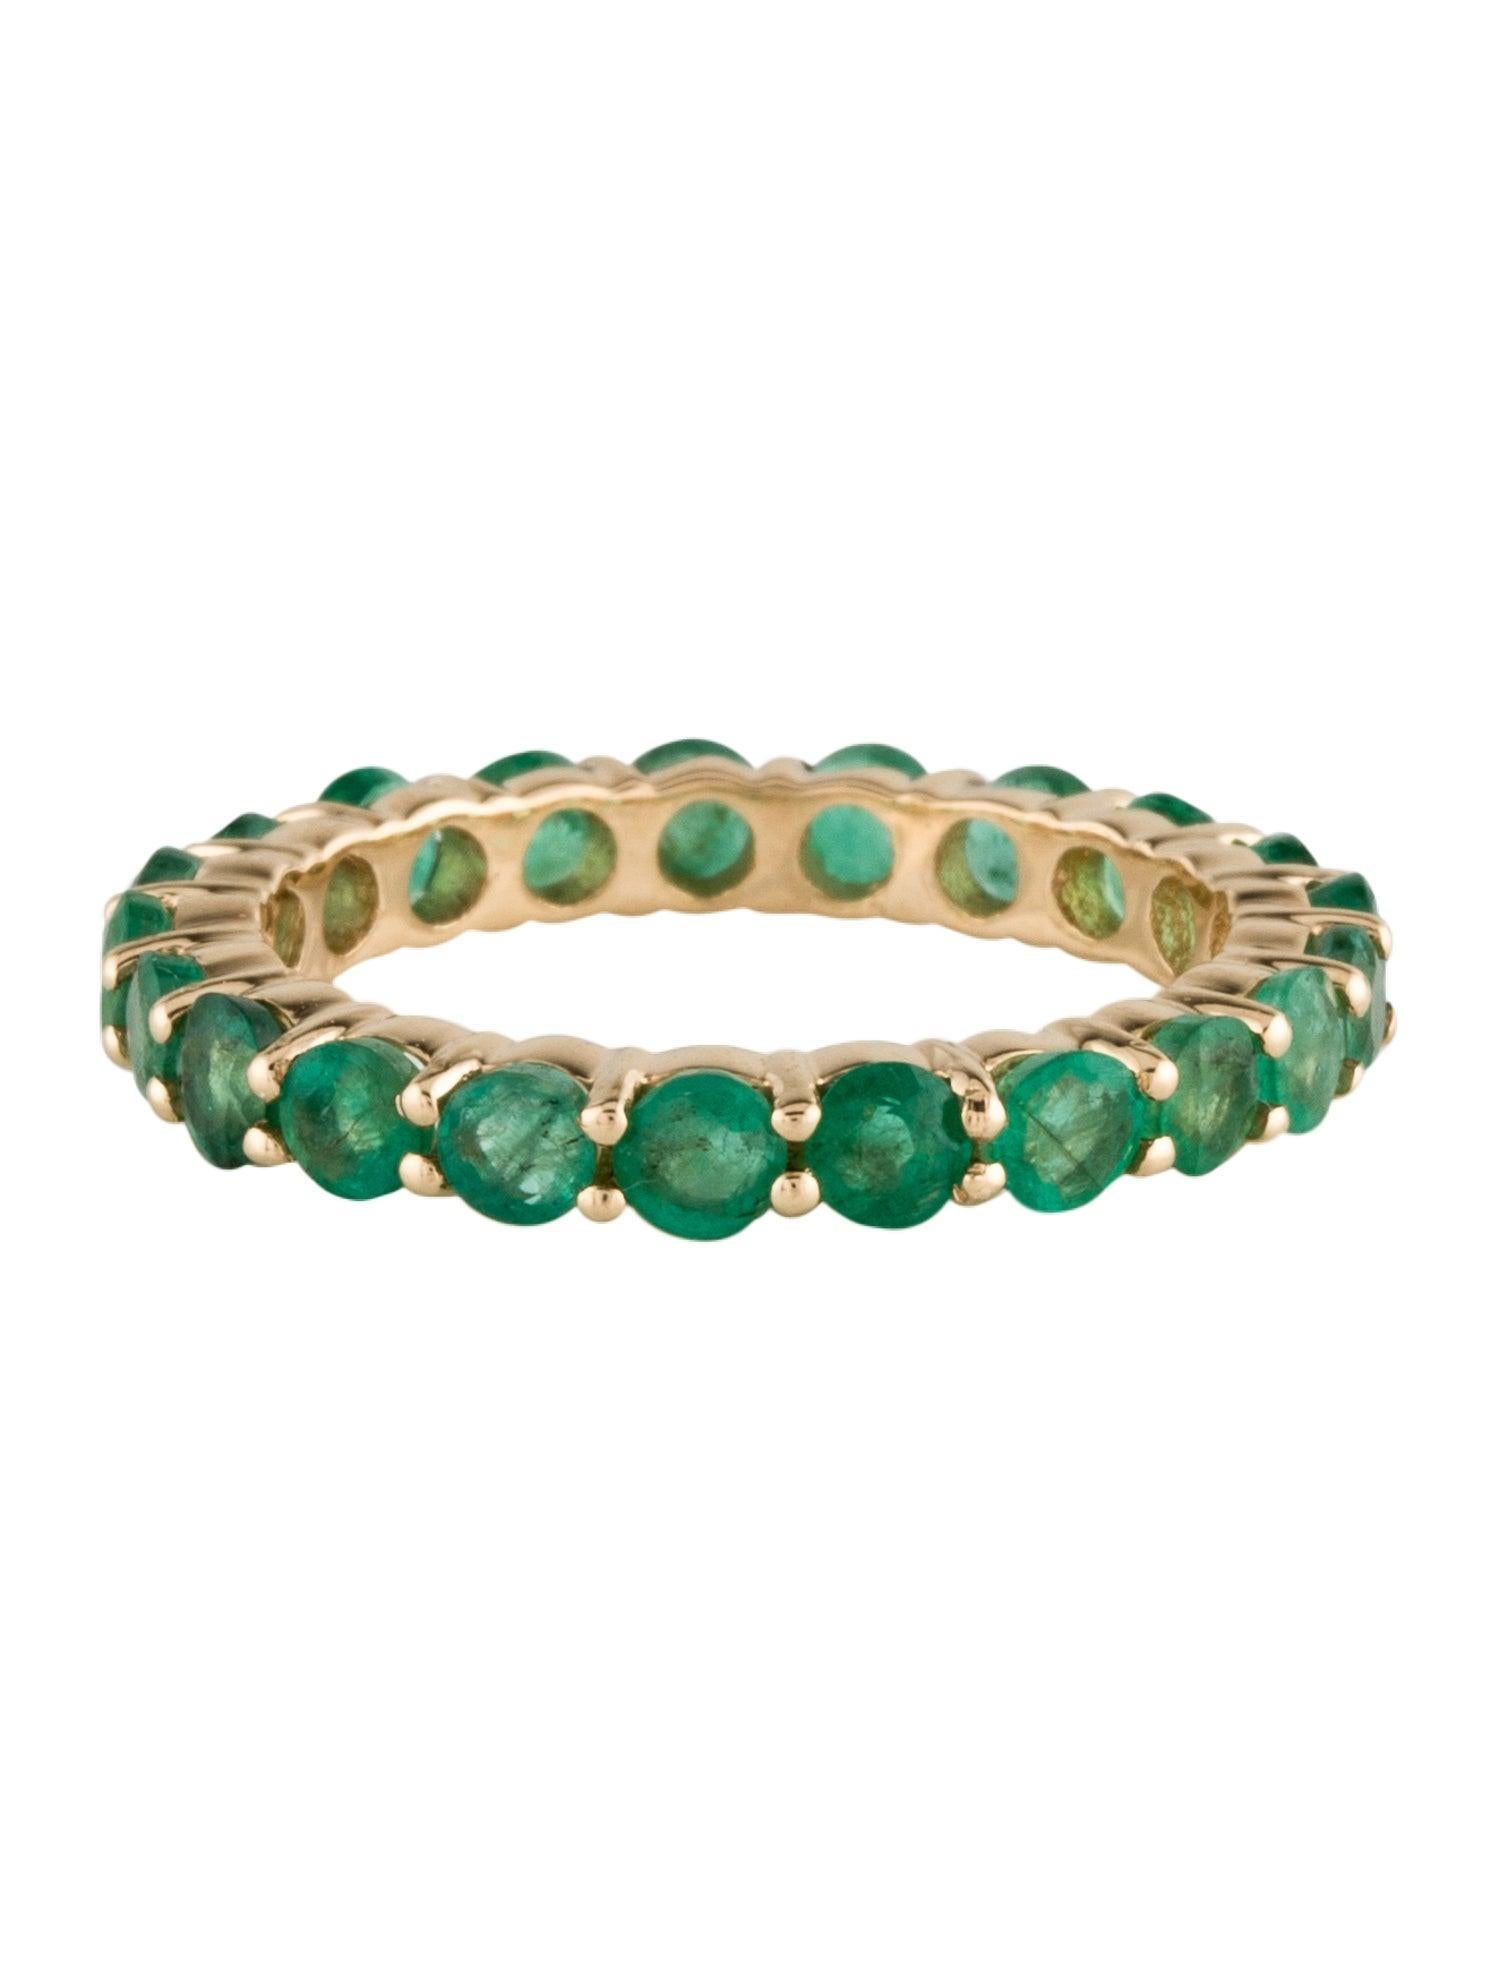 Brilliant Cut Exquisite 14K Emerald Eternity Band Ring 1.66ctw - Size 6.75 - Timeless Luxury For Sale